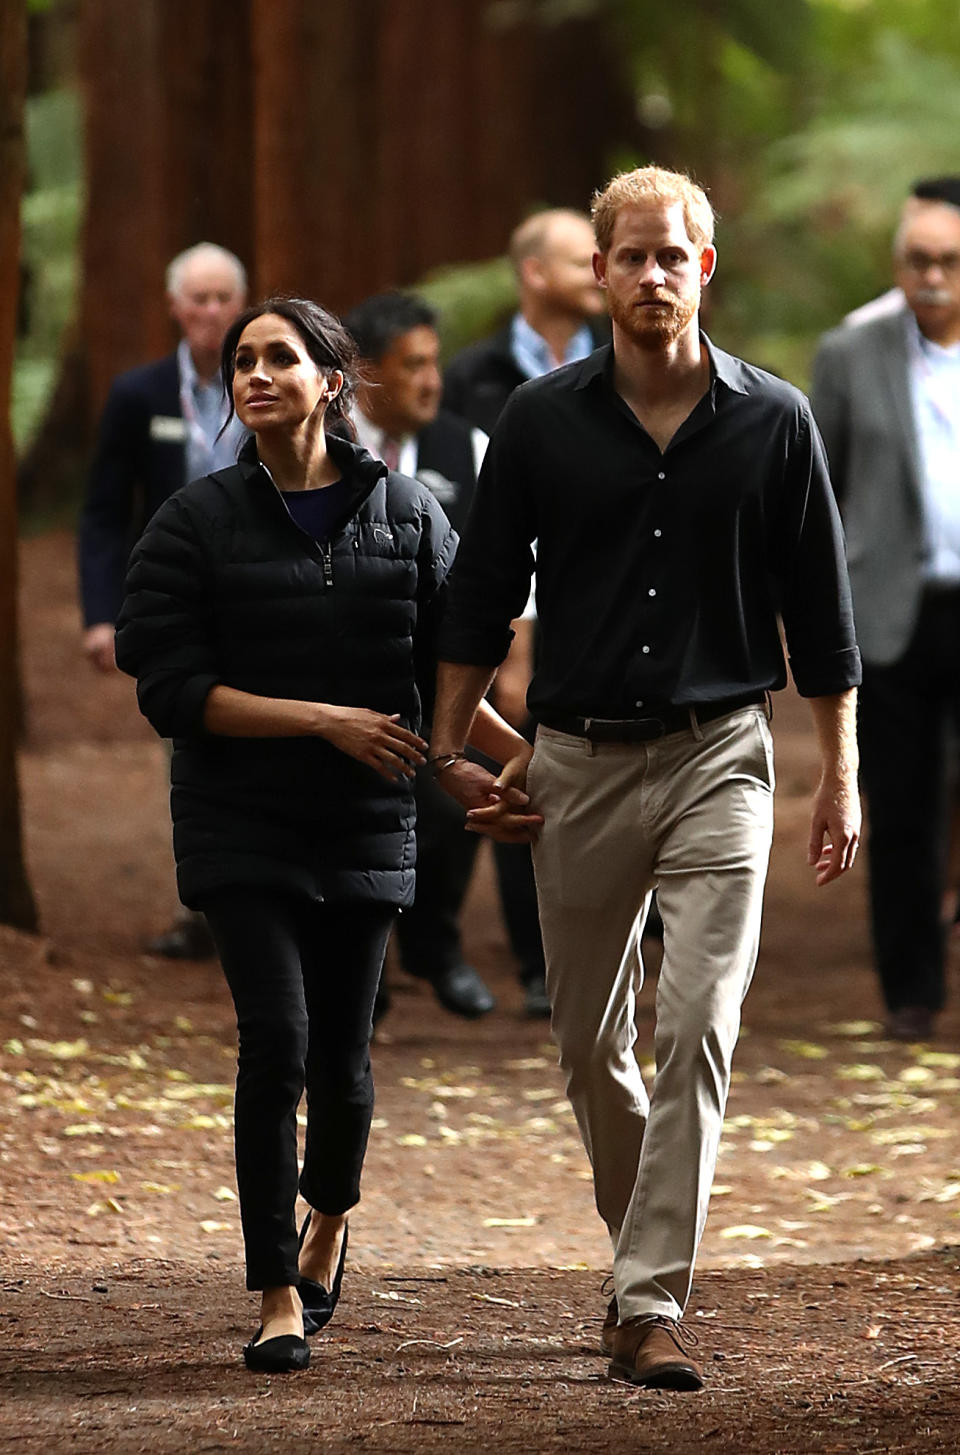 <p>The Duchess of Sussex changed into a less formal outfit for the couple’s final day of the royal tour. Meghan wore her go-to Mother jeans, flat pumps and a Norrøna coat for a visit to the Redwoods Treewalk on October 31. <em>[Photo: Getty]</em> </p>